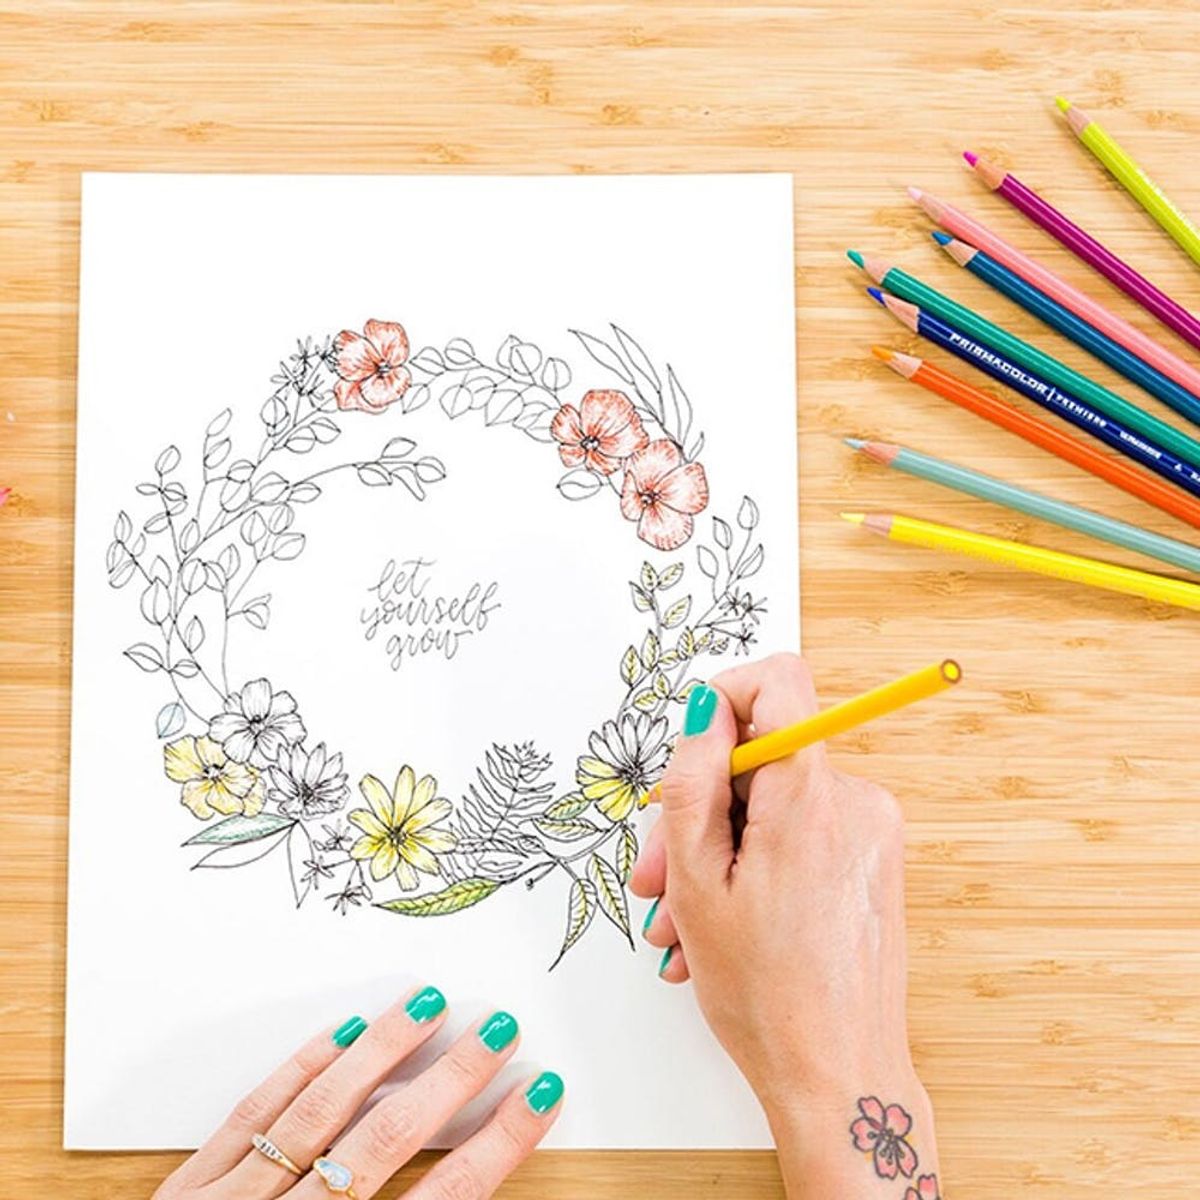 Learn How to Draw Florals in our New Online Class with Peggy Dean